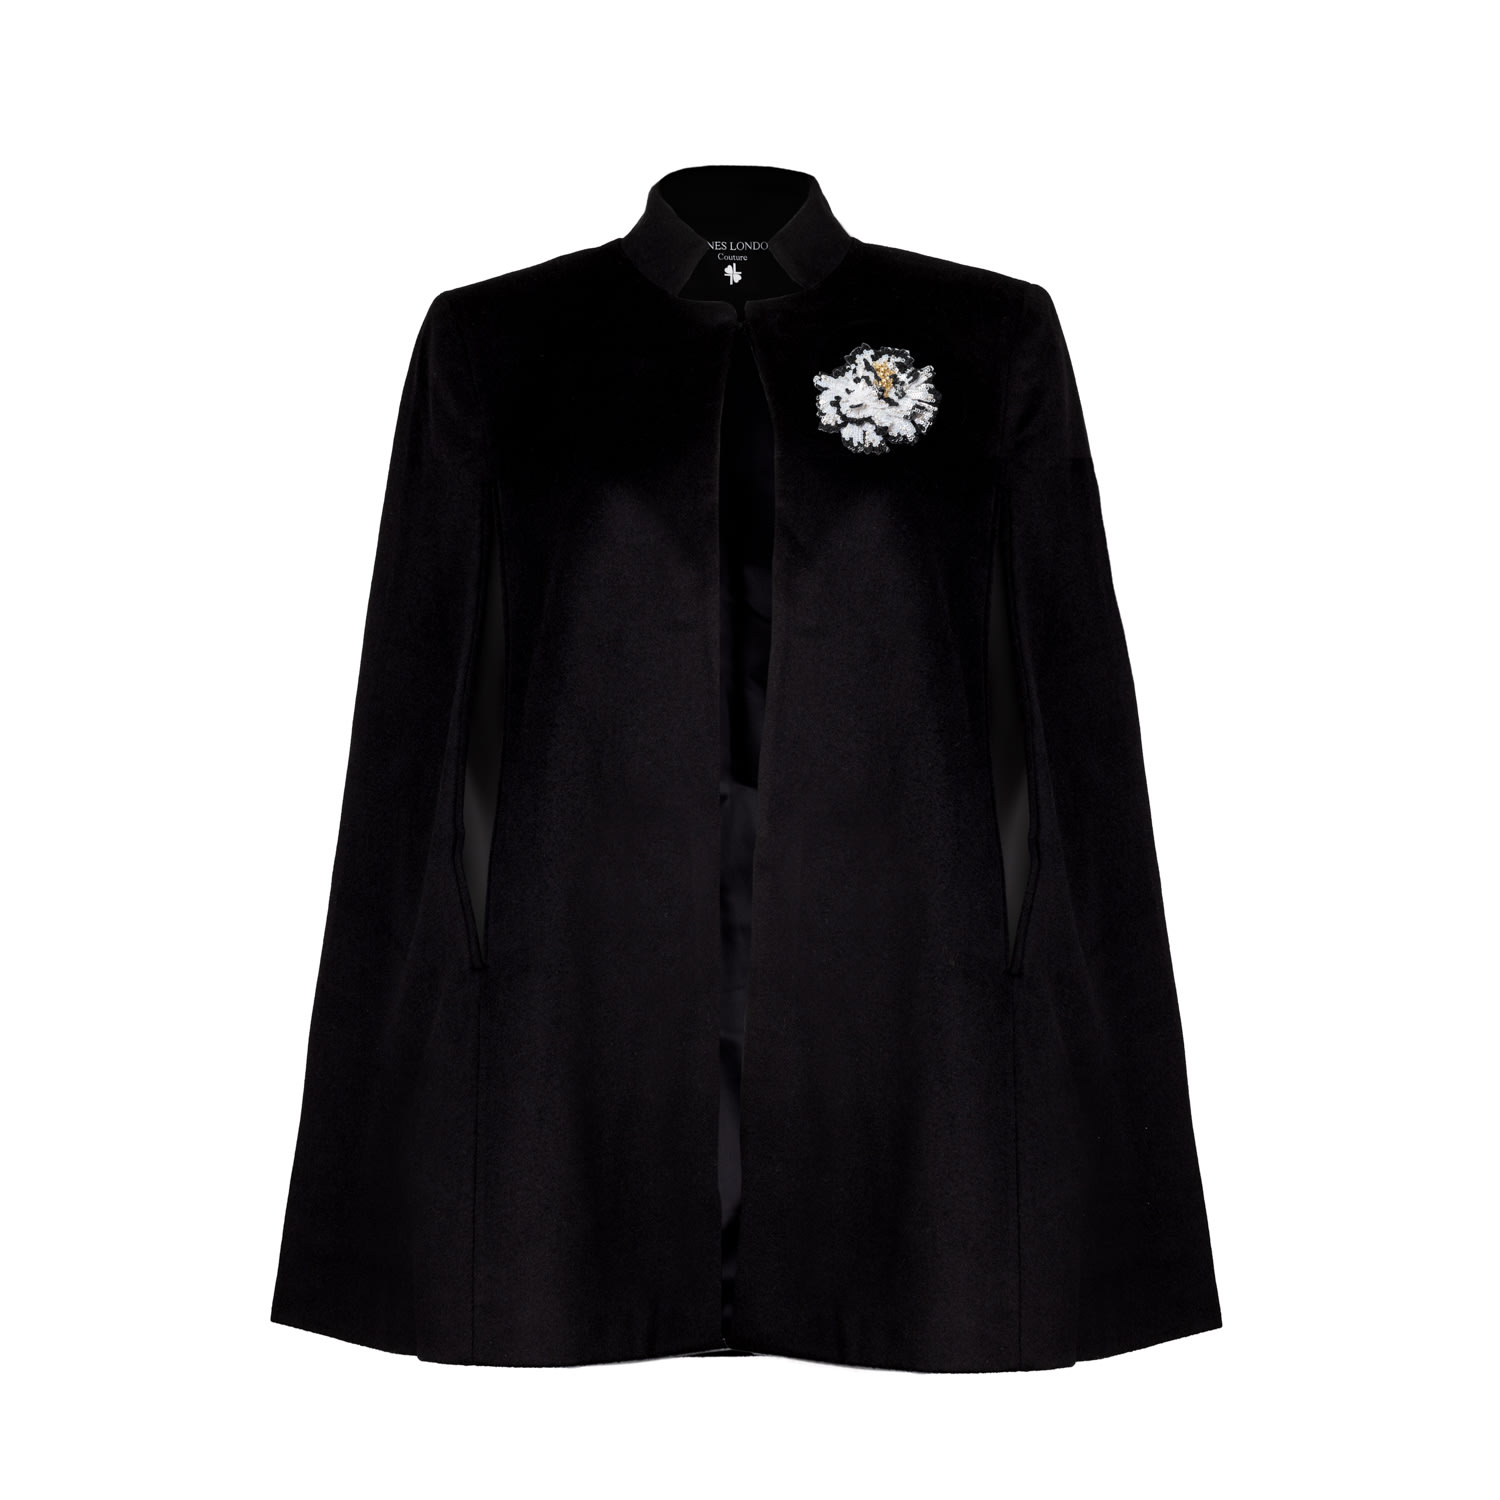 Women’s Laines Couture Wool Blend Cape With Embellished Black & White Peony - Black L/Xl Laines London